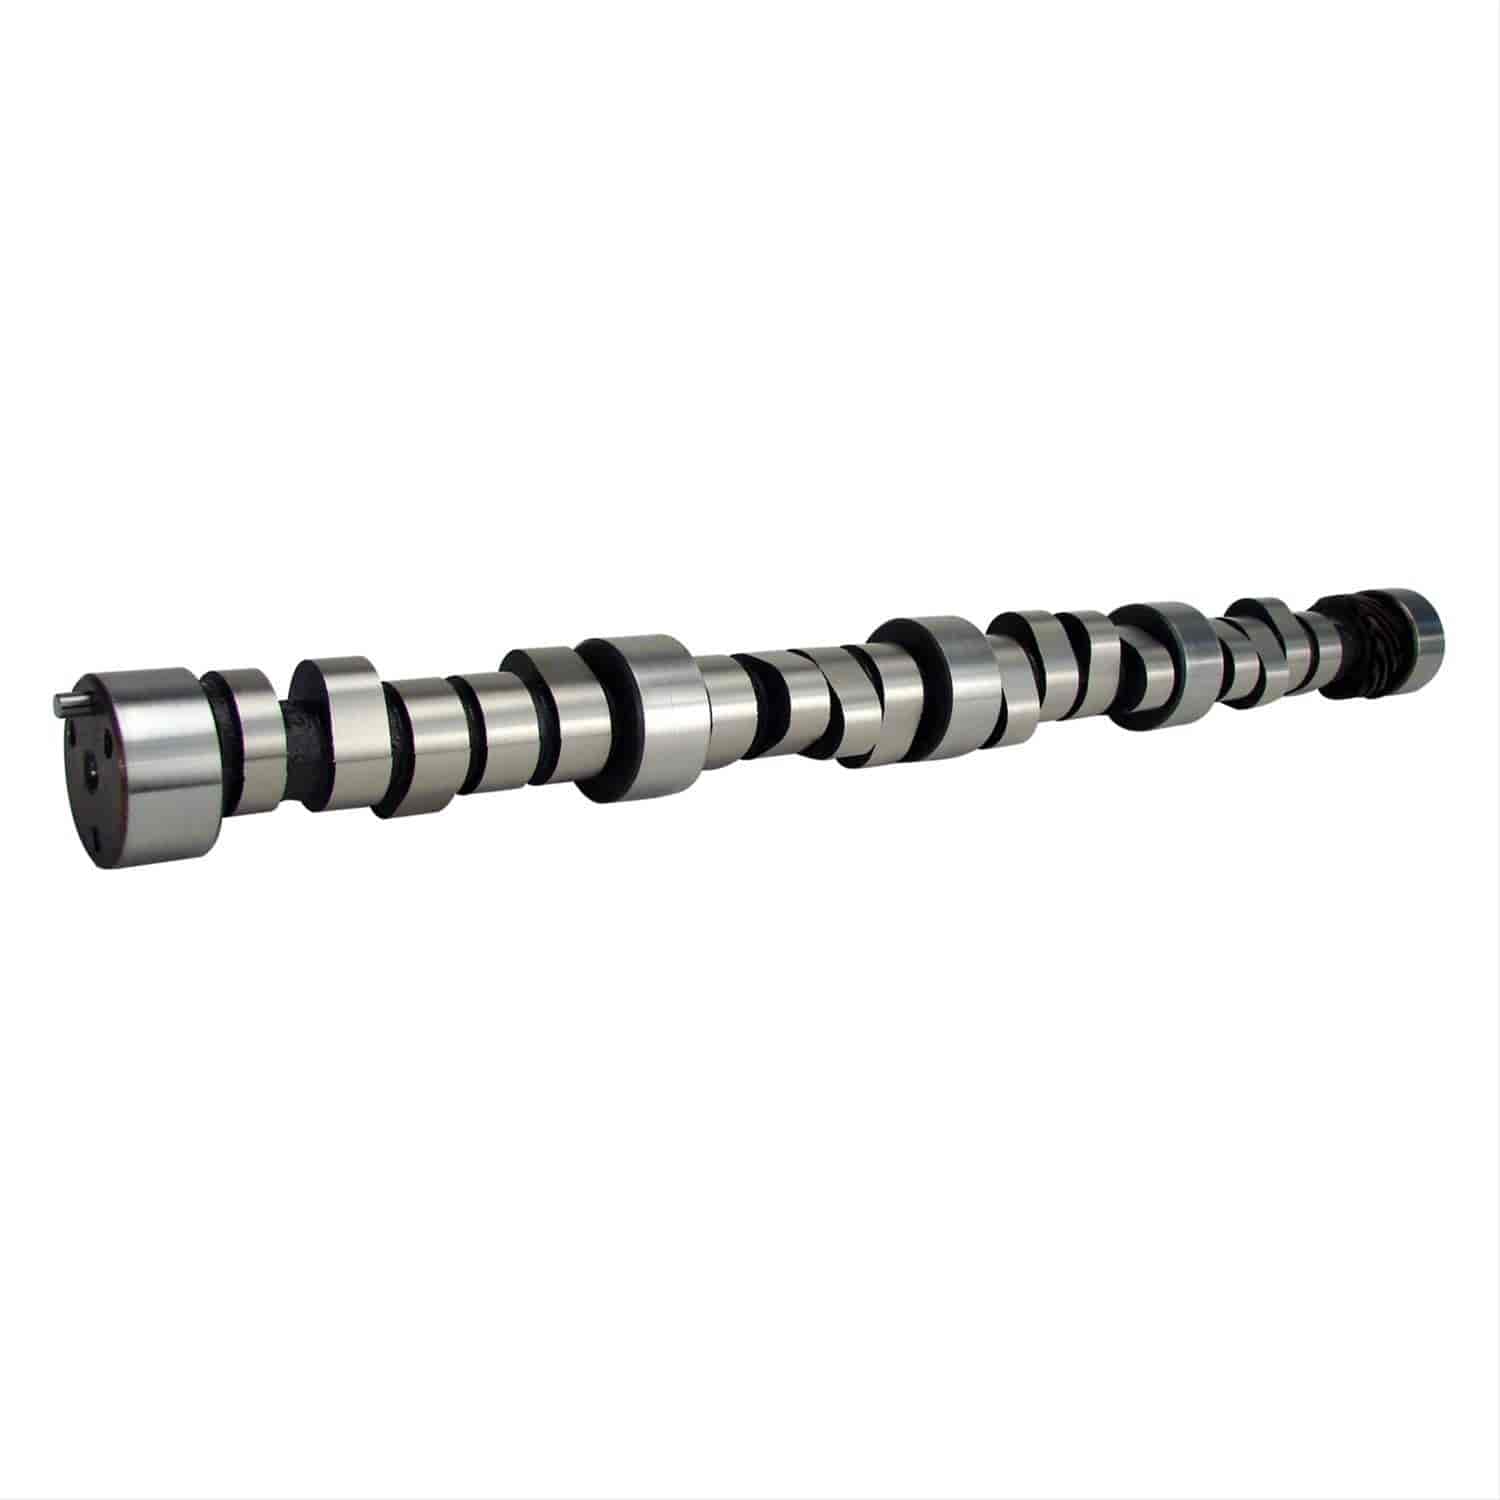 Voodoo Retro-Fit Hydraulic Roller Camshaft for 1965-96 Big Block Chevy 396-454